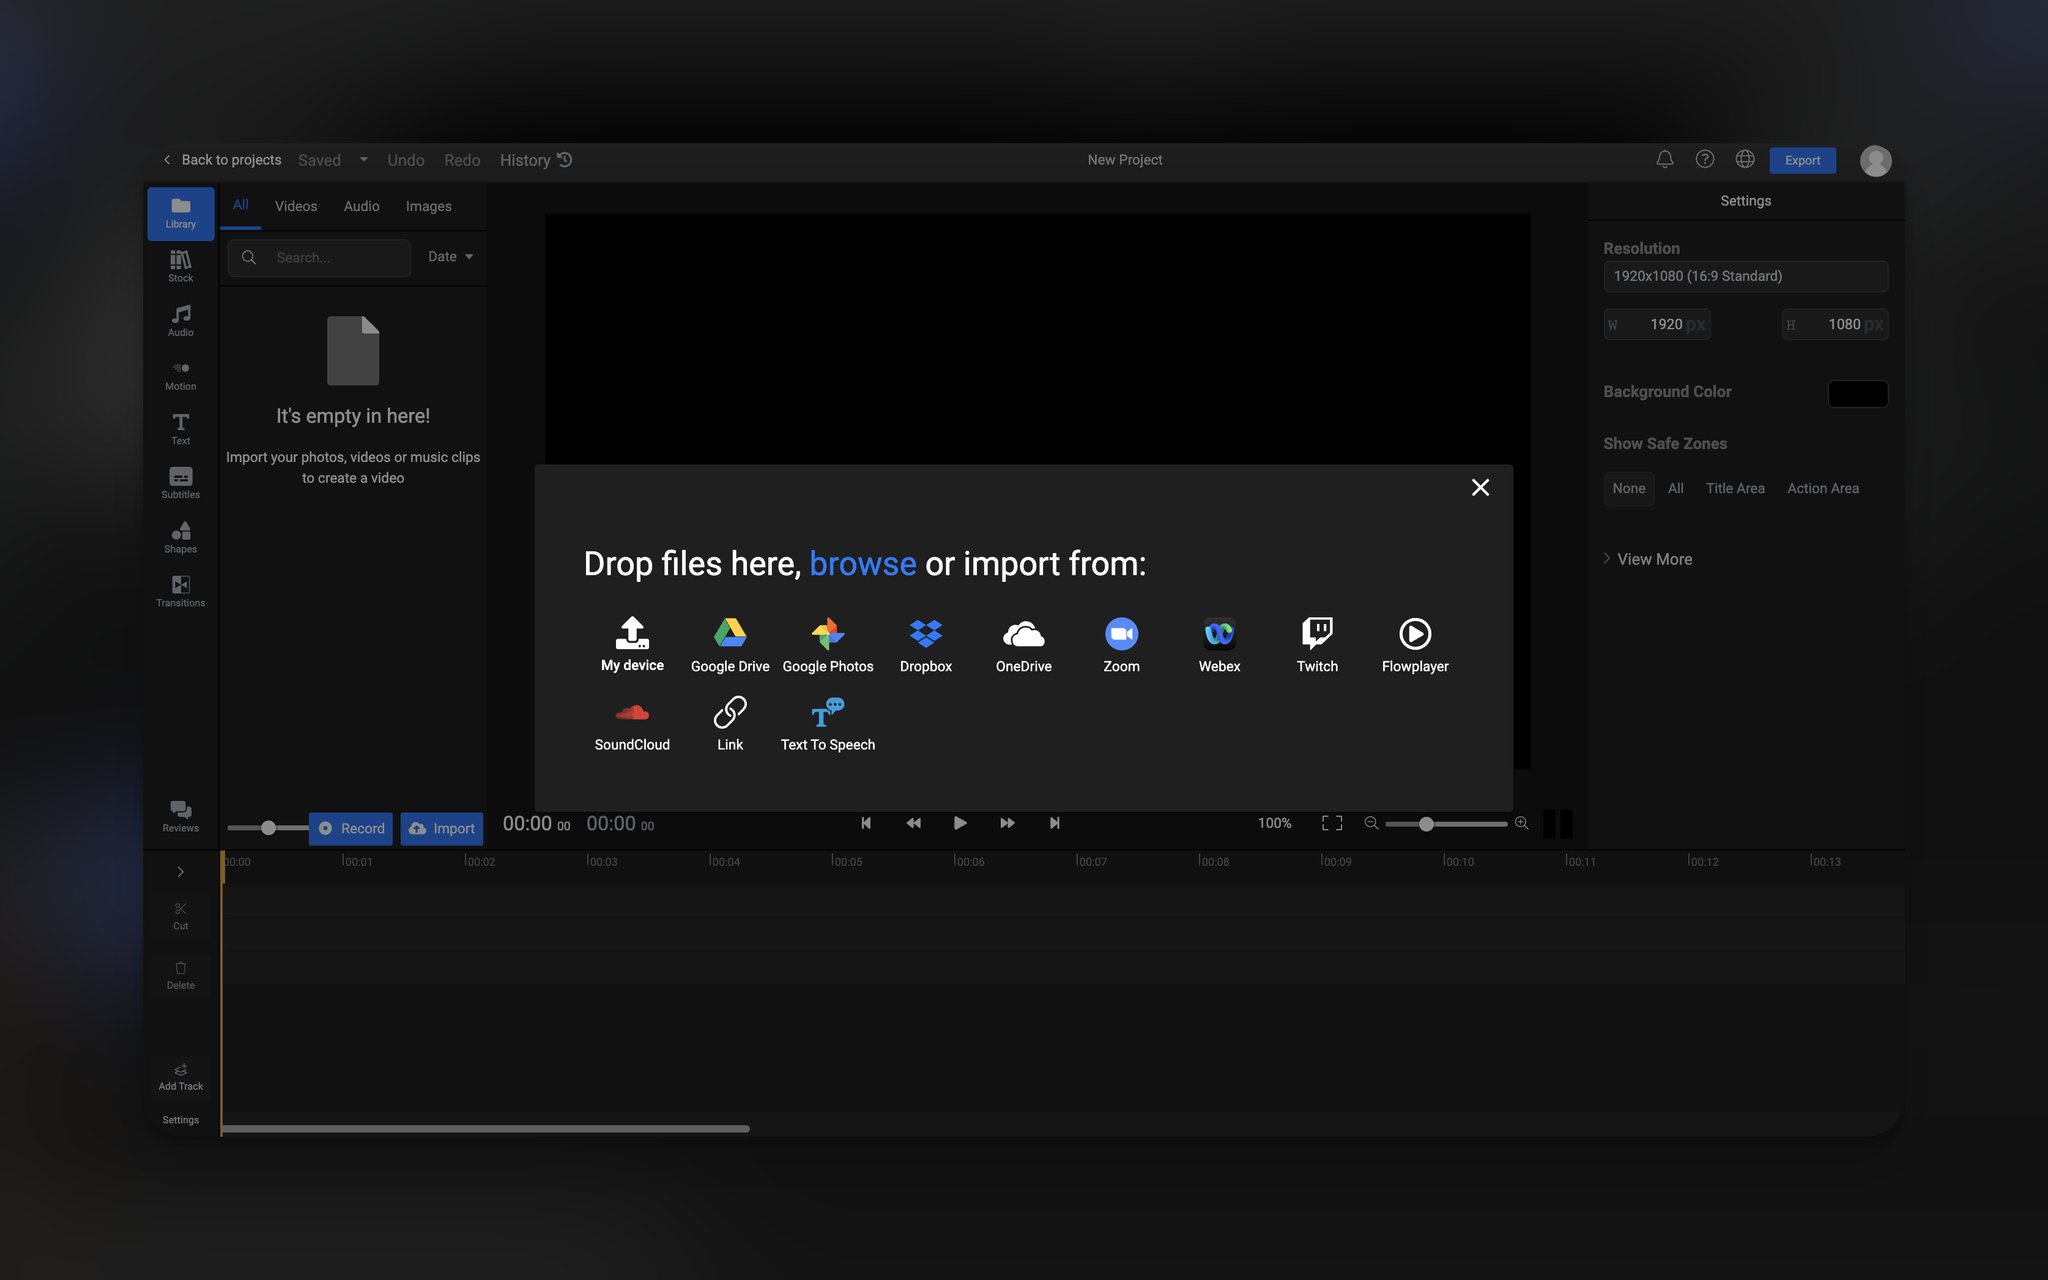 Flixier's user interface showing video upload options like Google Drive, My Device and Link URL